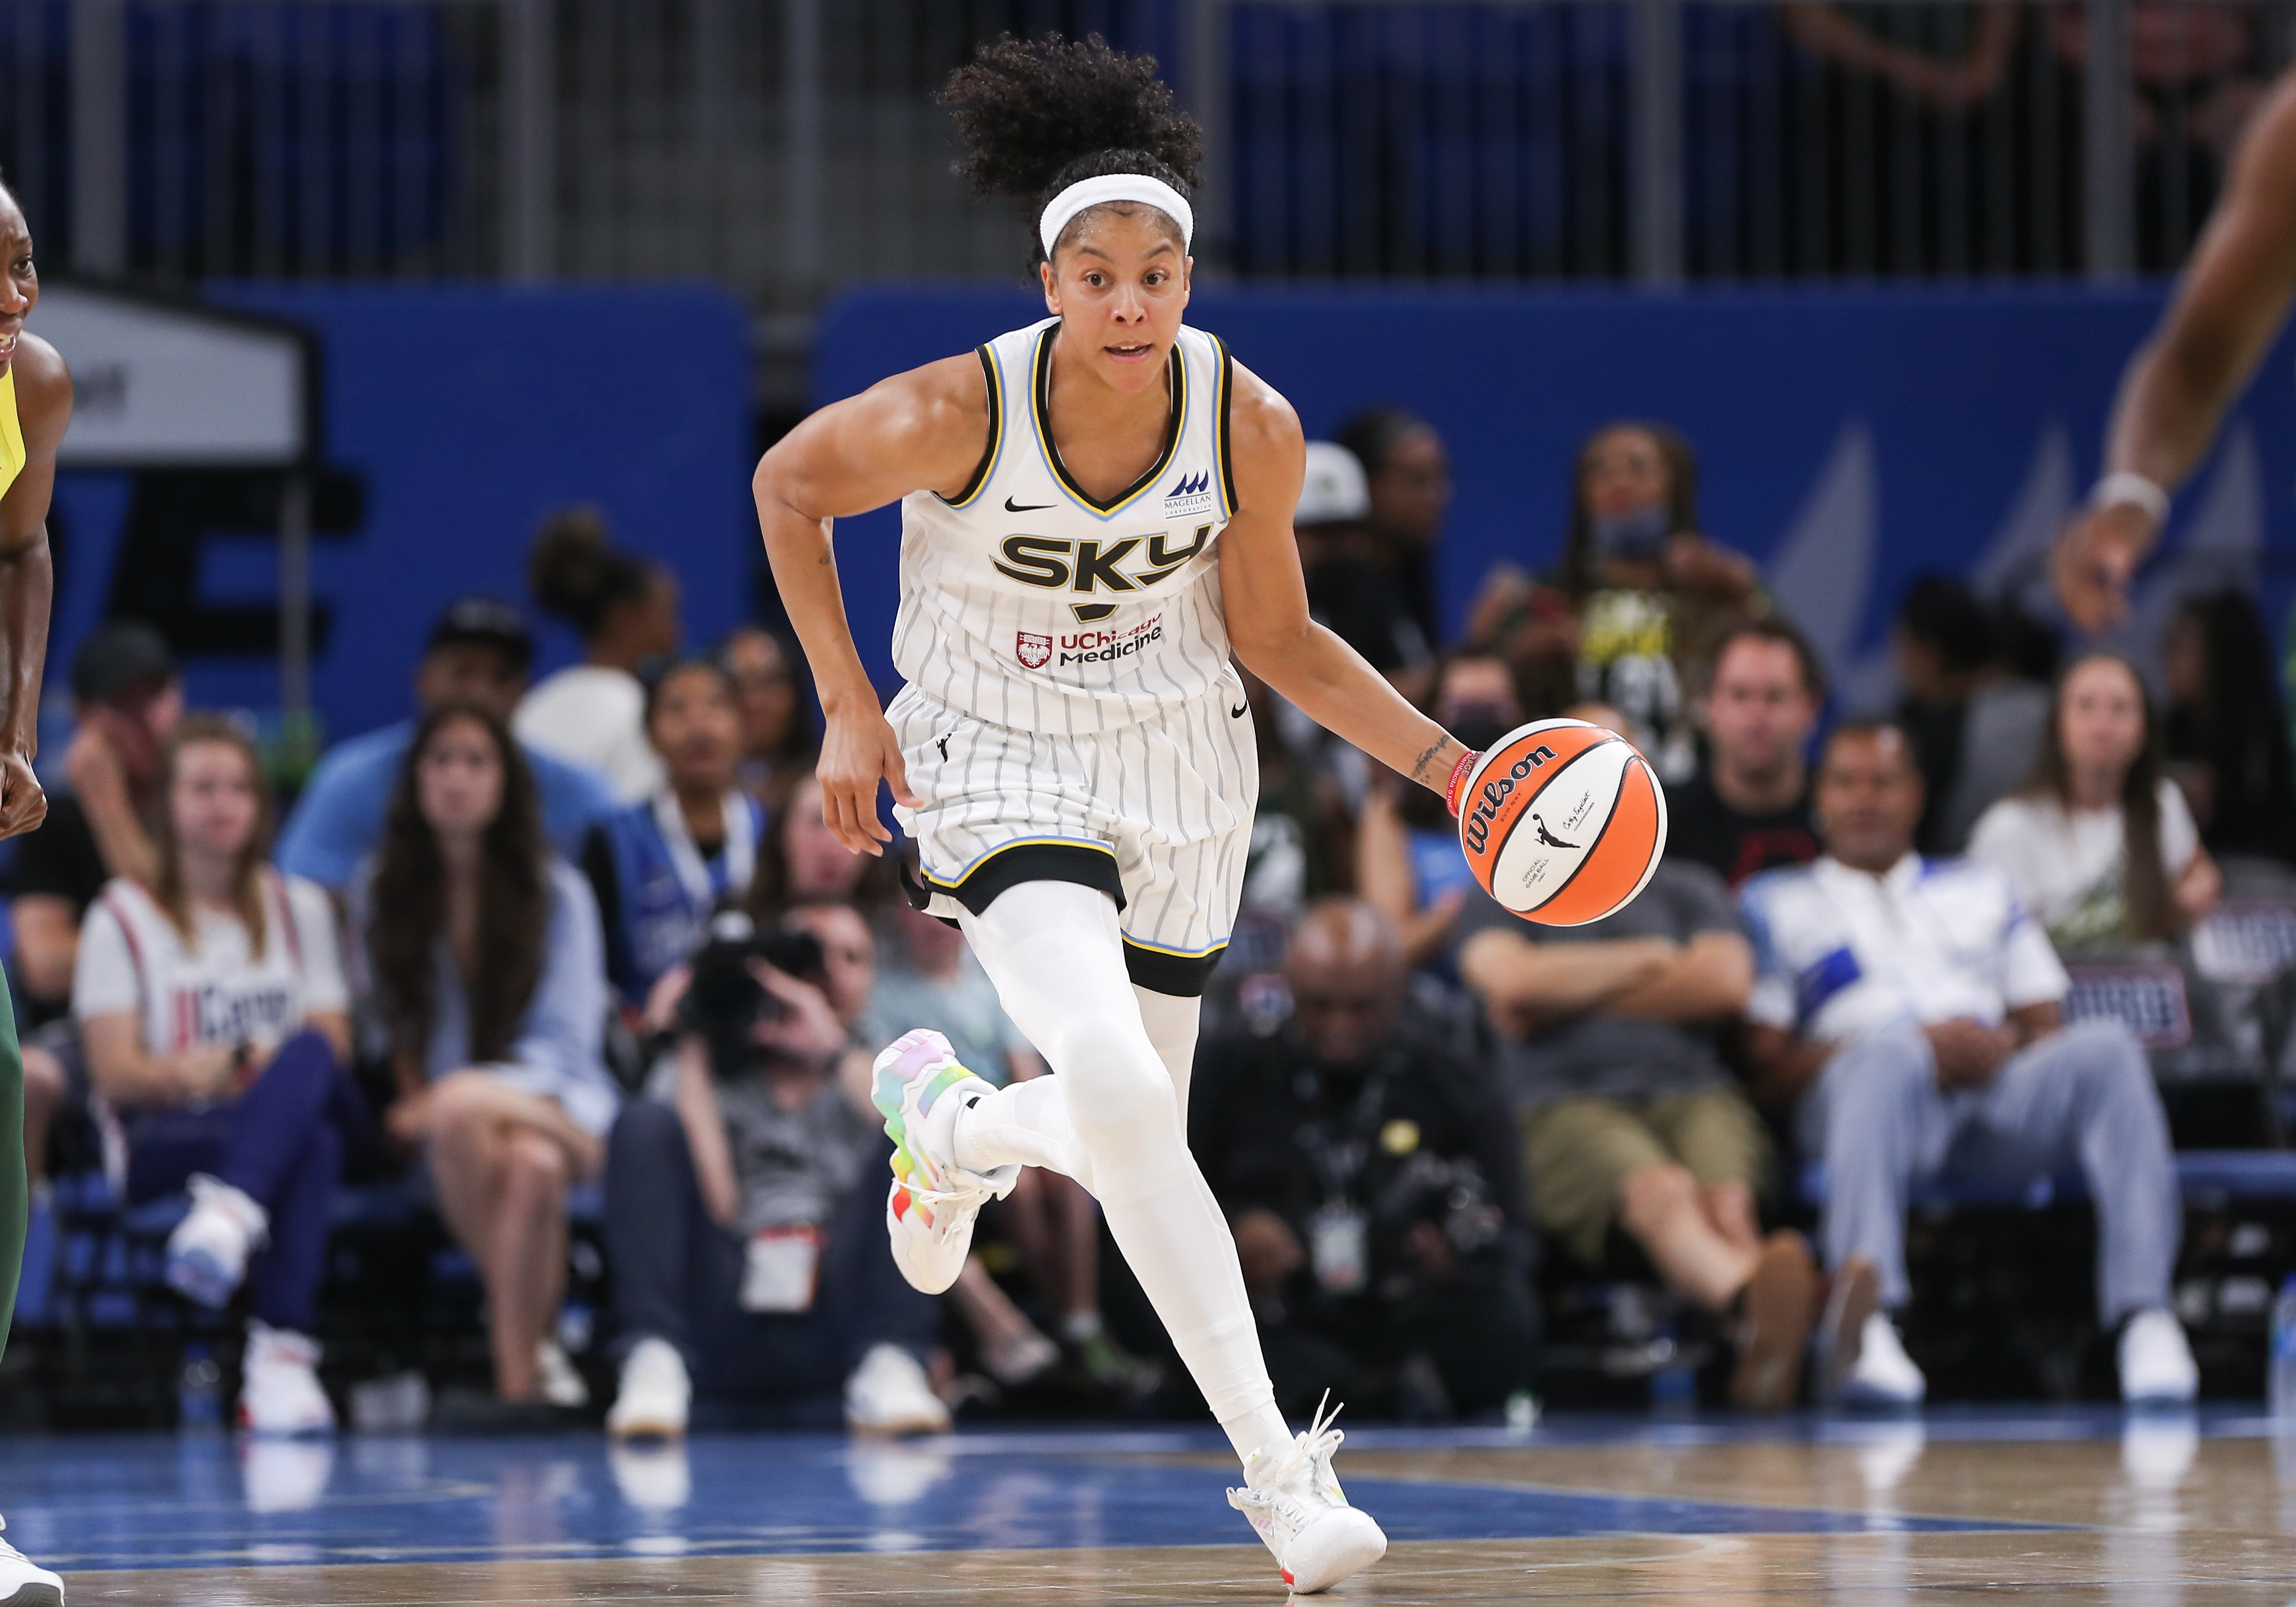 WNBA: JUL 20 Seattle Storm at Chicago Sky